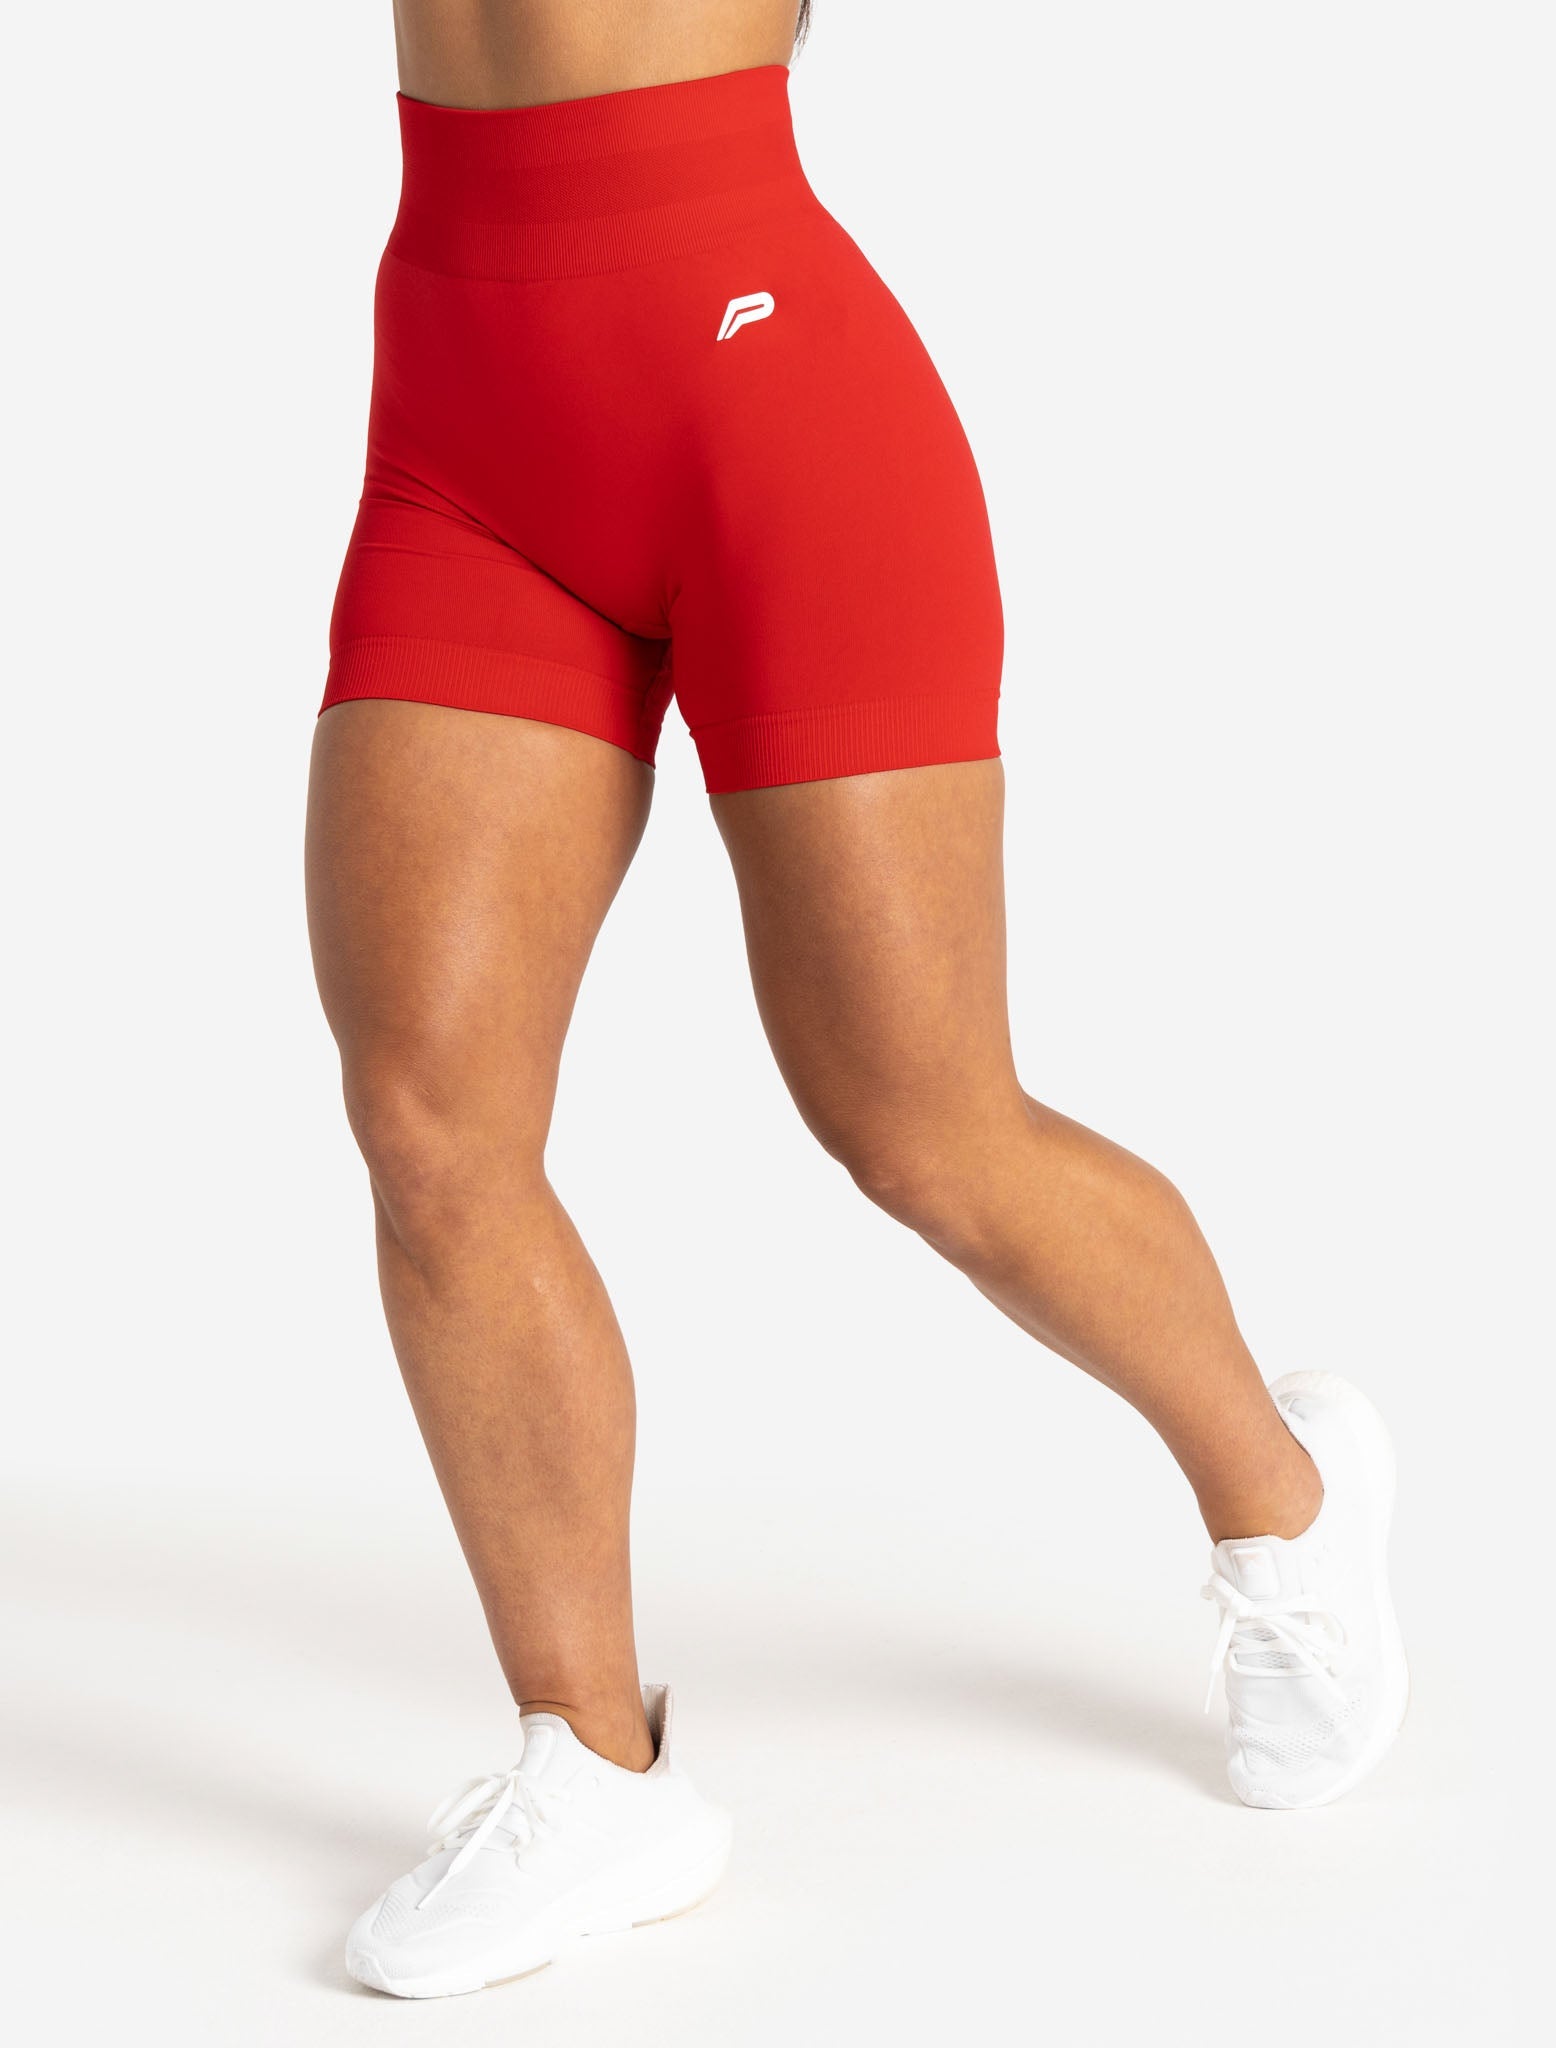 Scrunch Seamless Shorts / Candy Red Pursue Fitness 6